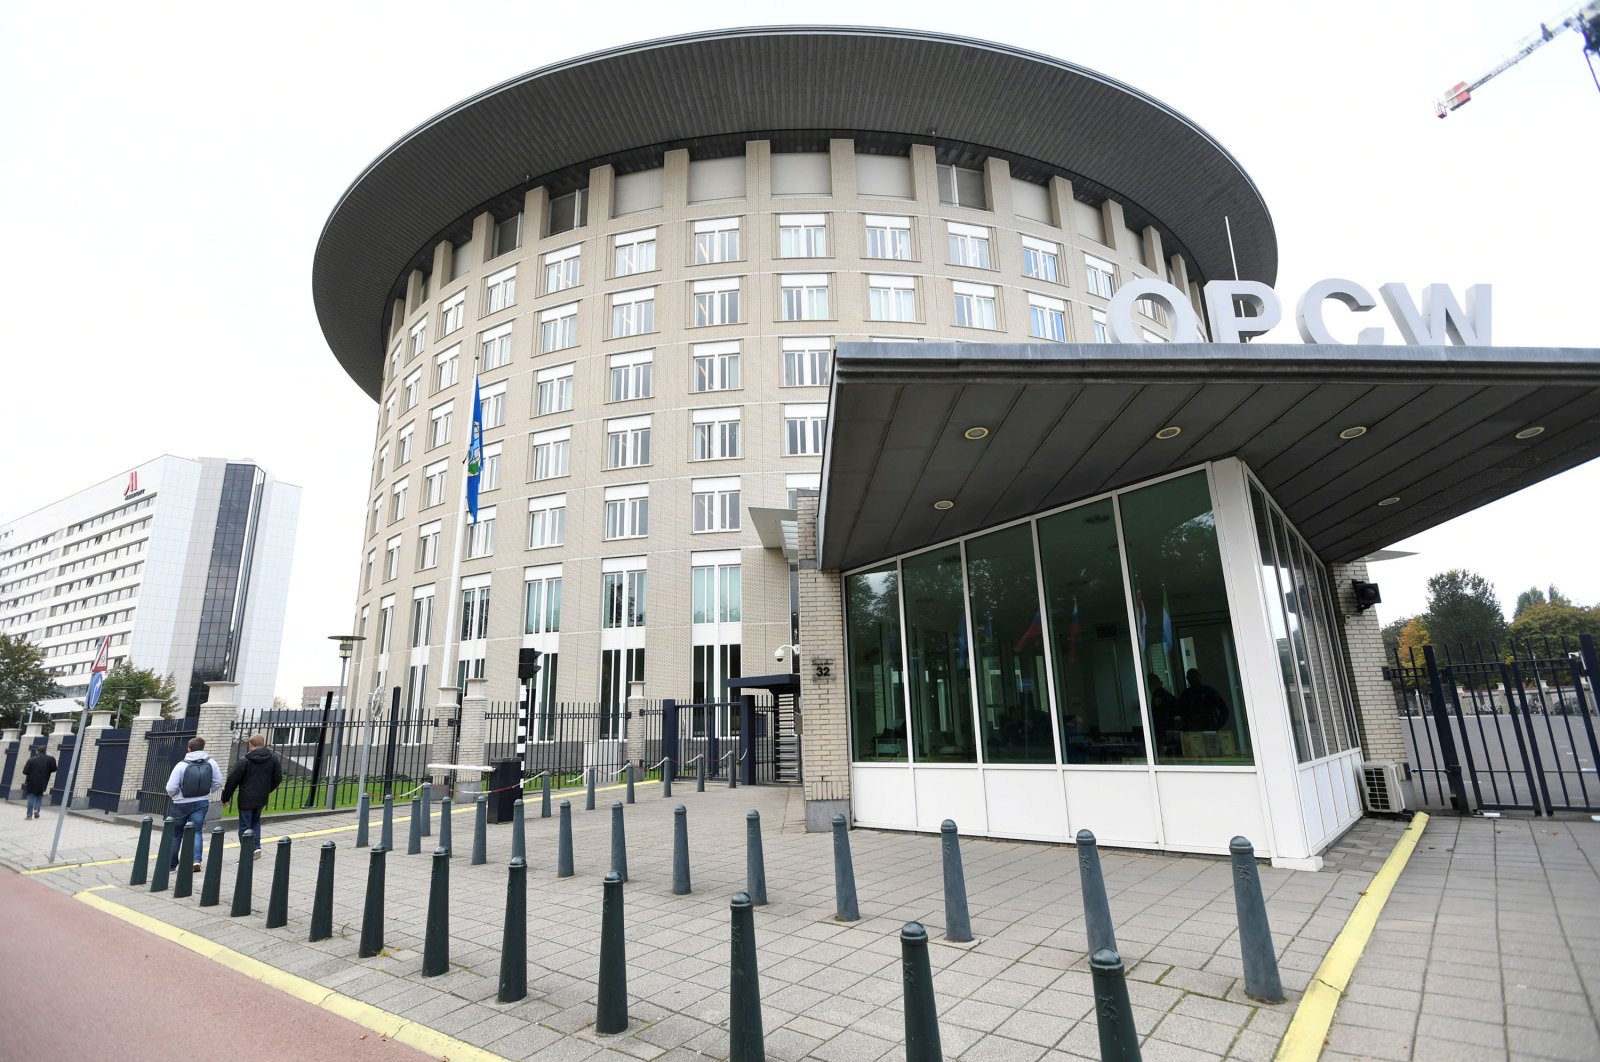 The headquarters of the Organization for the Prohibition of Chemical Weapons (OPCW) is pictured in The Hague, the Netherlands, Oct. 4, 2018. (REUTERS Photo)